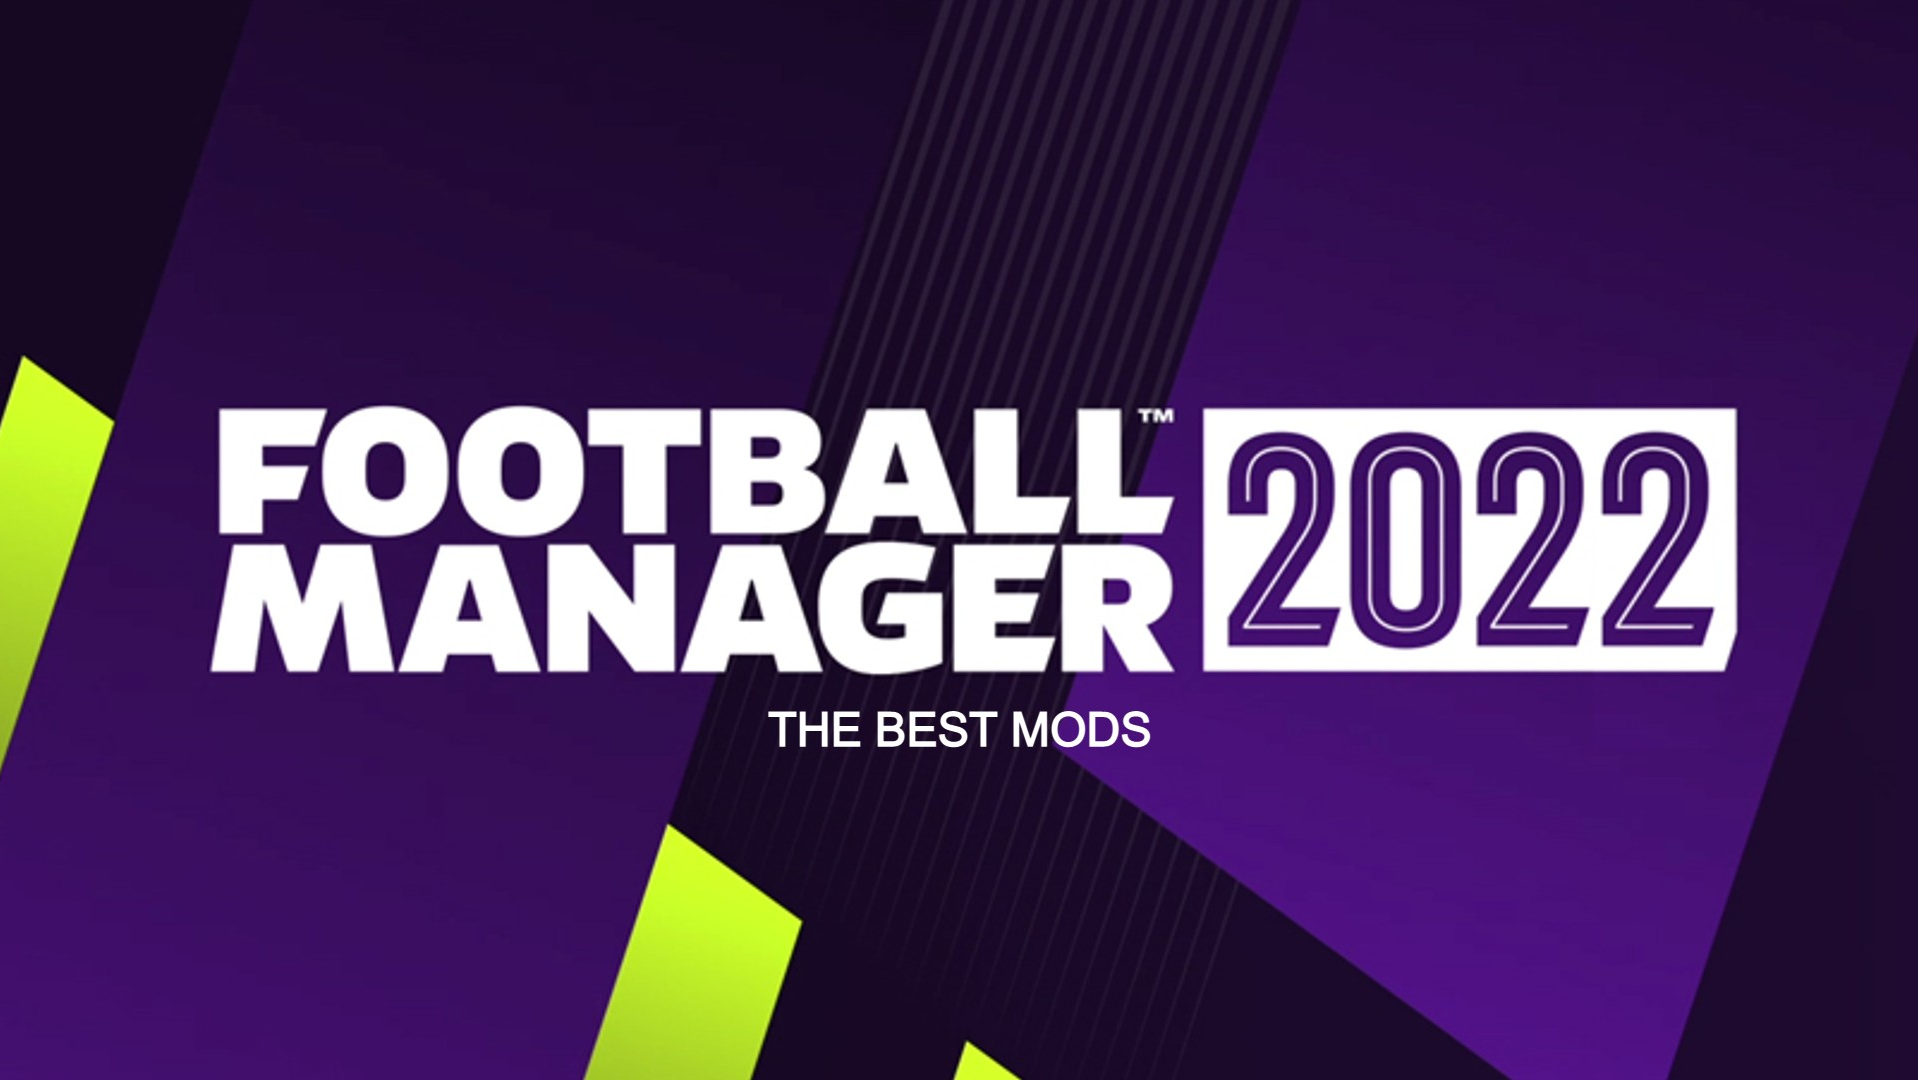 Football Manager 2022 Officially Revealed